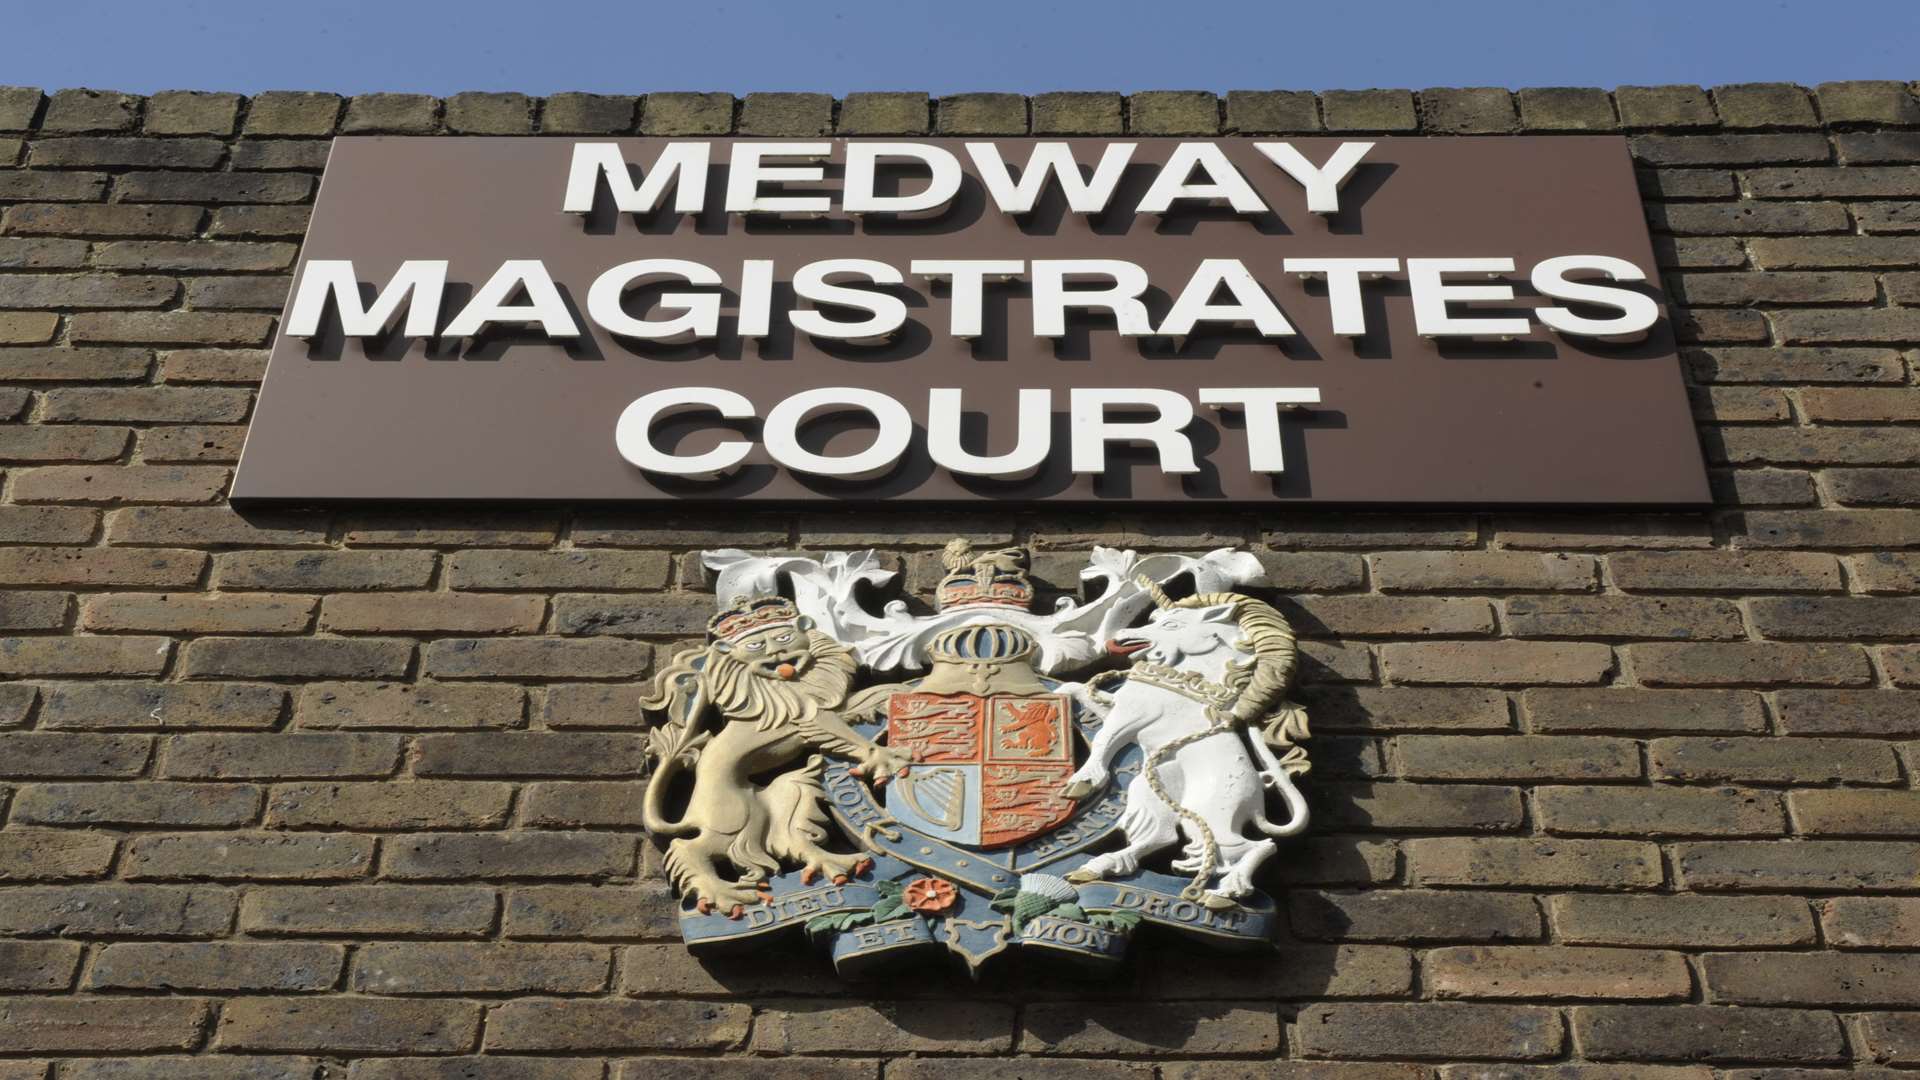 James Dennard is due to appear before Medway Magistrates Court on Tuesday, January 16.